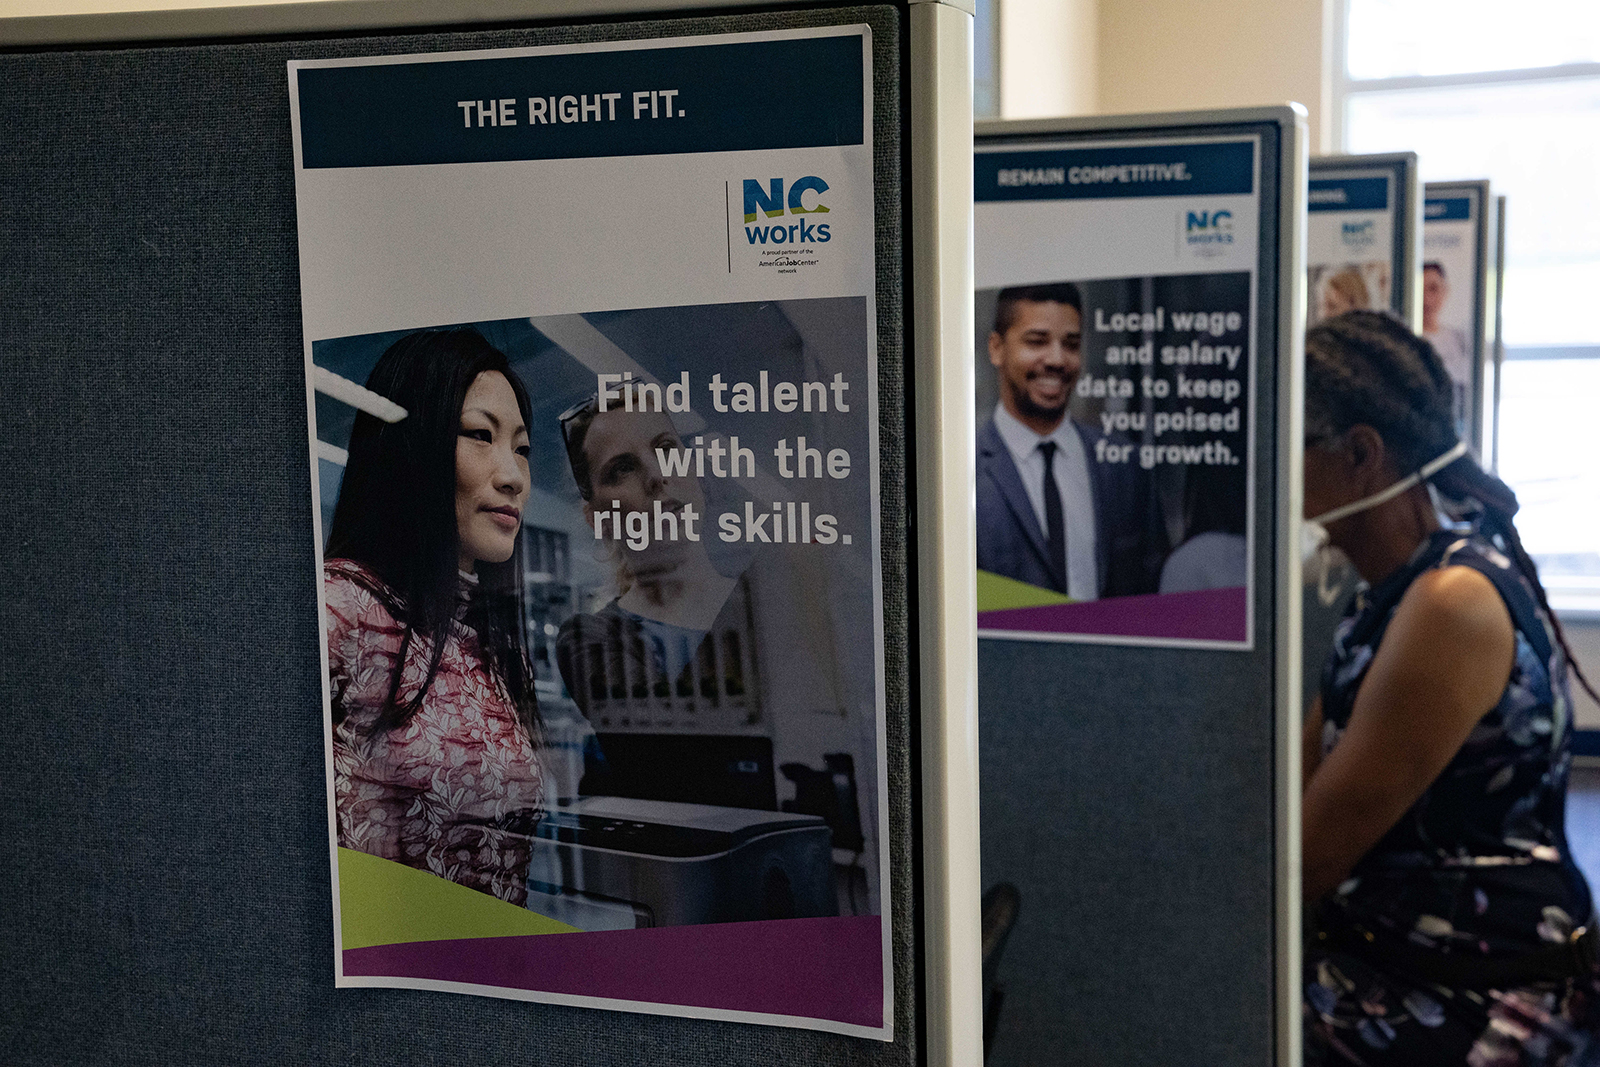 An attendee fills out job applications at a Novant Health Career Fair at NC Works in Wilmington, North Carolina, on April 20.